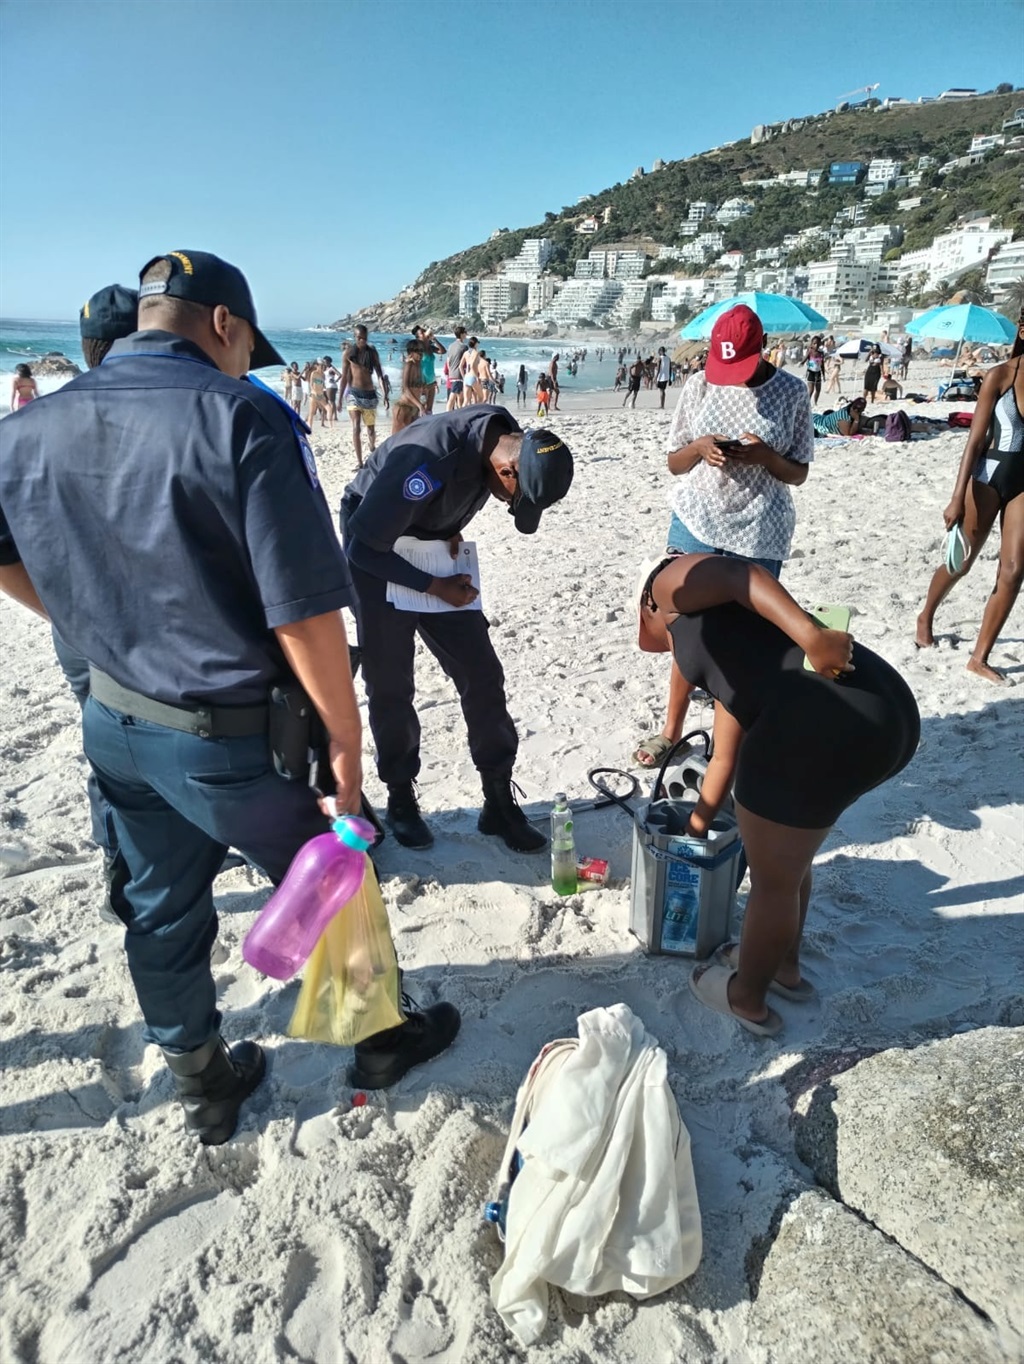 BEACHGOERS have been using creative ways to trick cops so that they can smuggle booze into beaches illegally. Pic supplied 